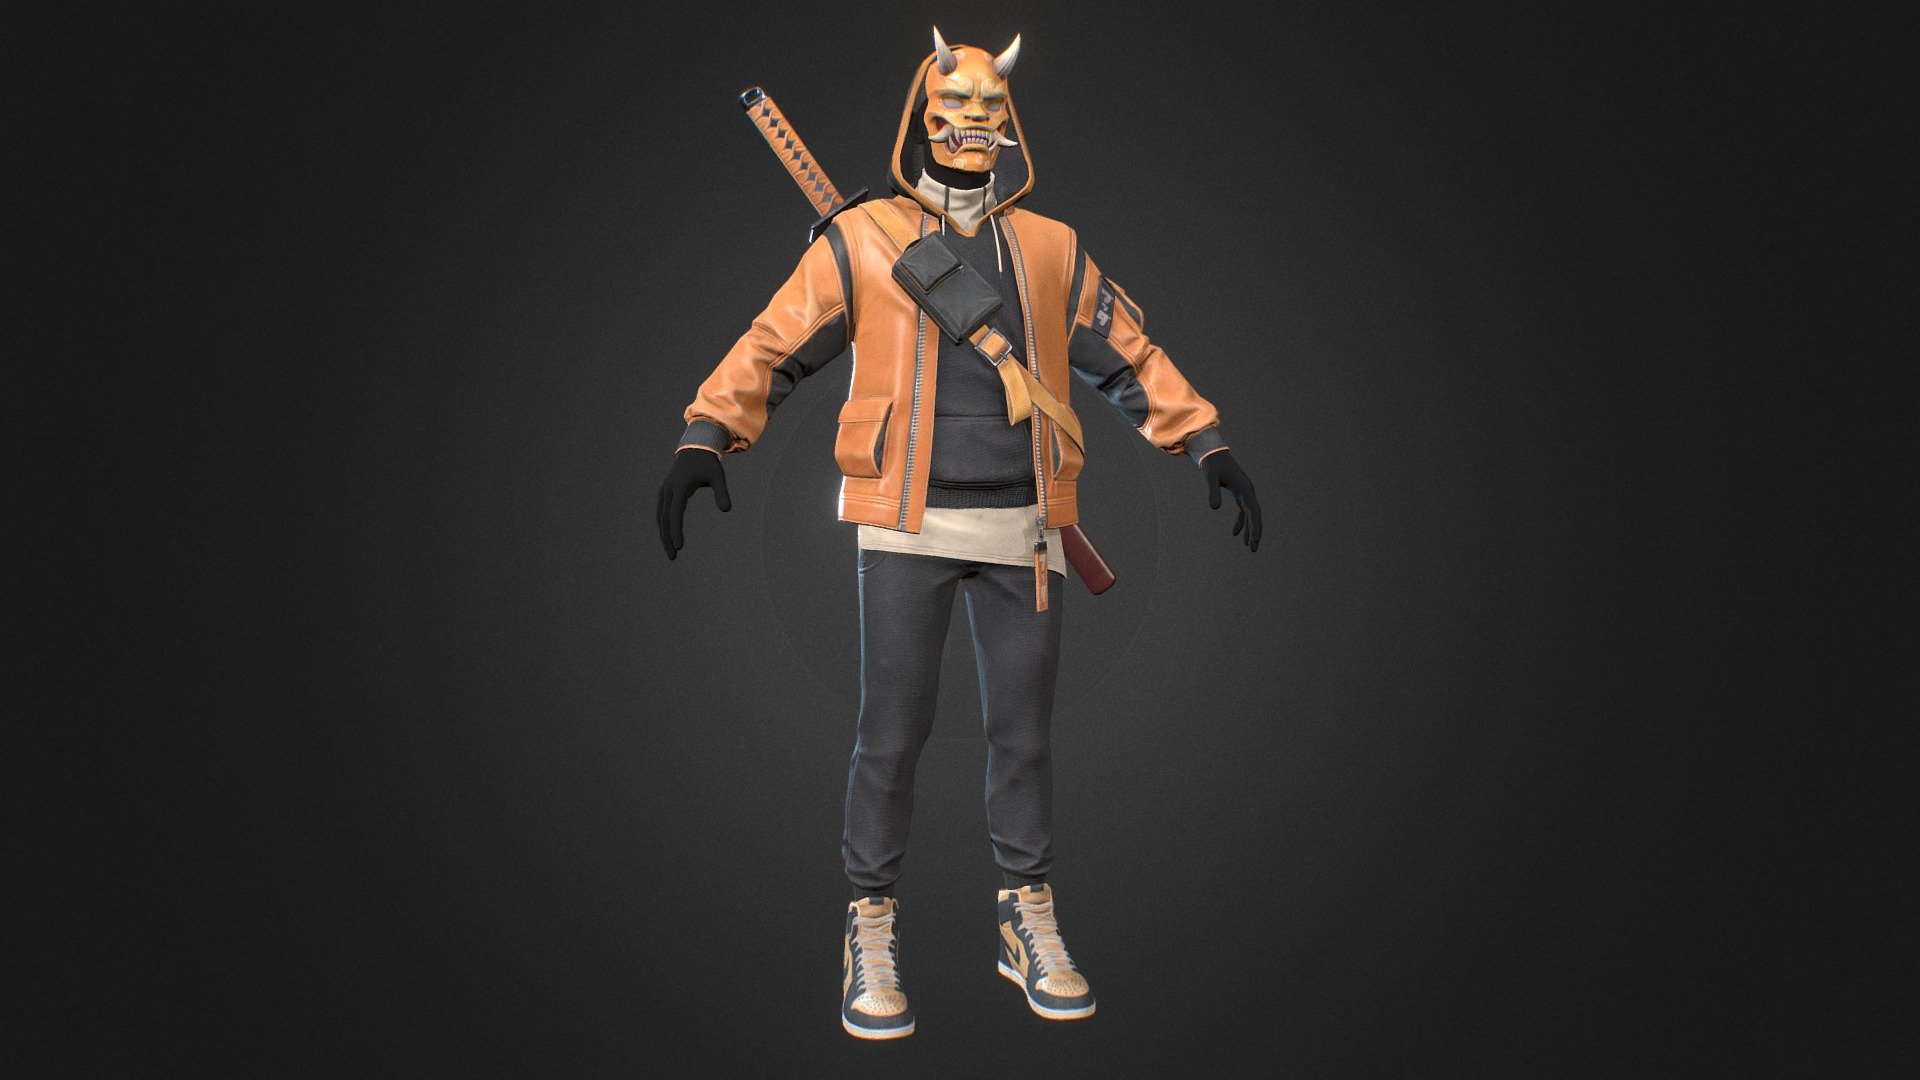 Urban samurai


Viking game ready asset is a high quality, low poly asset originally modeled in blender 2.92.0
This model is intended for game/real time/ usage/close-UPS/illustraions/historical movies/short films/cartoons/various renderings.
The renders and wireframes were done in Marmoset Toolbag 4.
Optimized for games (game ready)
This model is not intended for subdivision.
The sculpture was made in Zbrush2021
Retopology was made for animation in blender
Textured in Substance Painter
All materials and objects named appropriately.
Tested in Marmoset Toolbag 4 (see renders).
No special plug-ins needed to use this product.

Specifications


Texture Size: 4096
Textures format: PNG
Textures: Base Color, Normal, Metallic, Roughness
Tris: 16,300
Faces: 8,195
Verts: 8,405
 - Urban samurai - 3D model by Yahor Yurkavets (@Got2b) 3d model